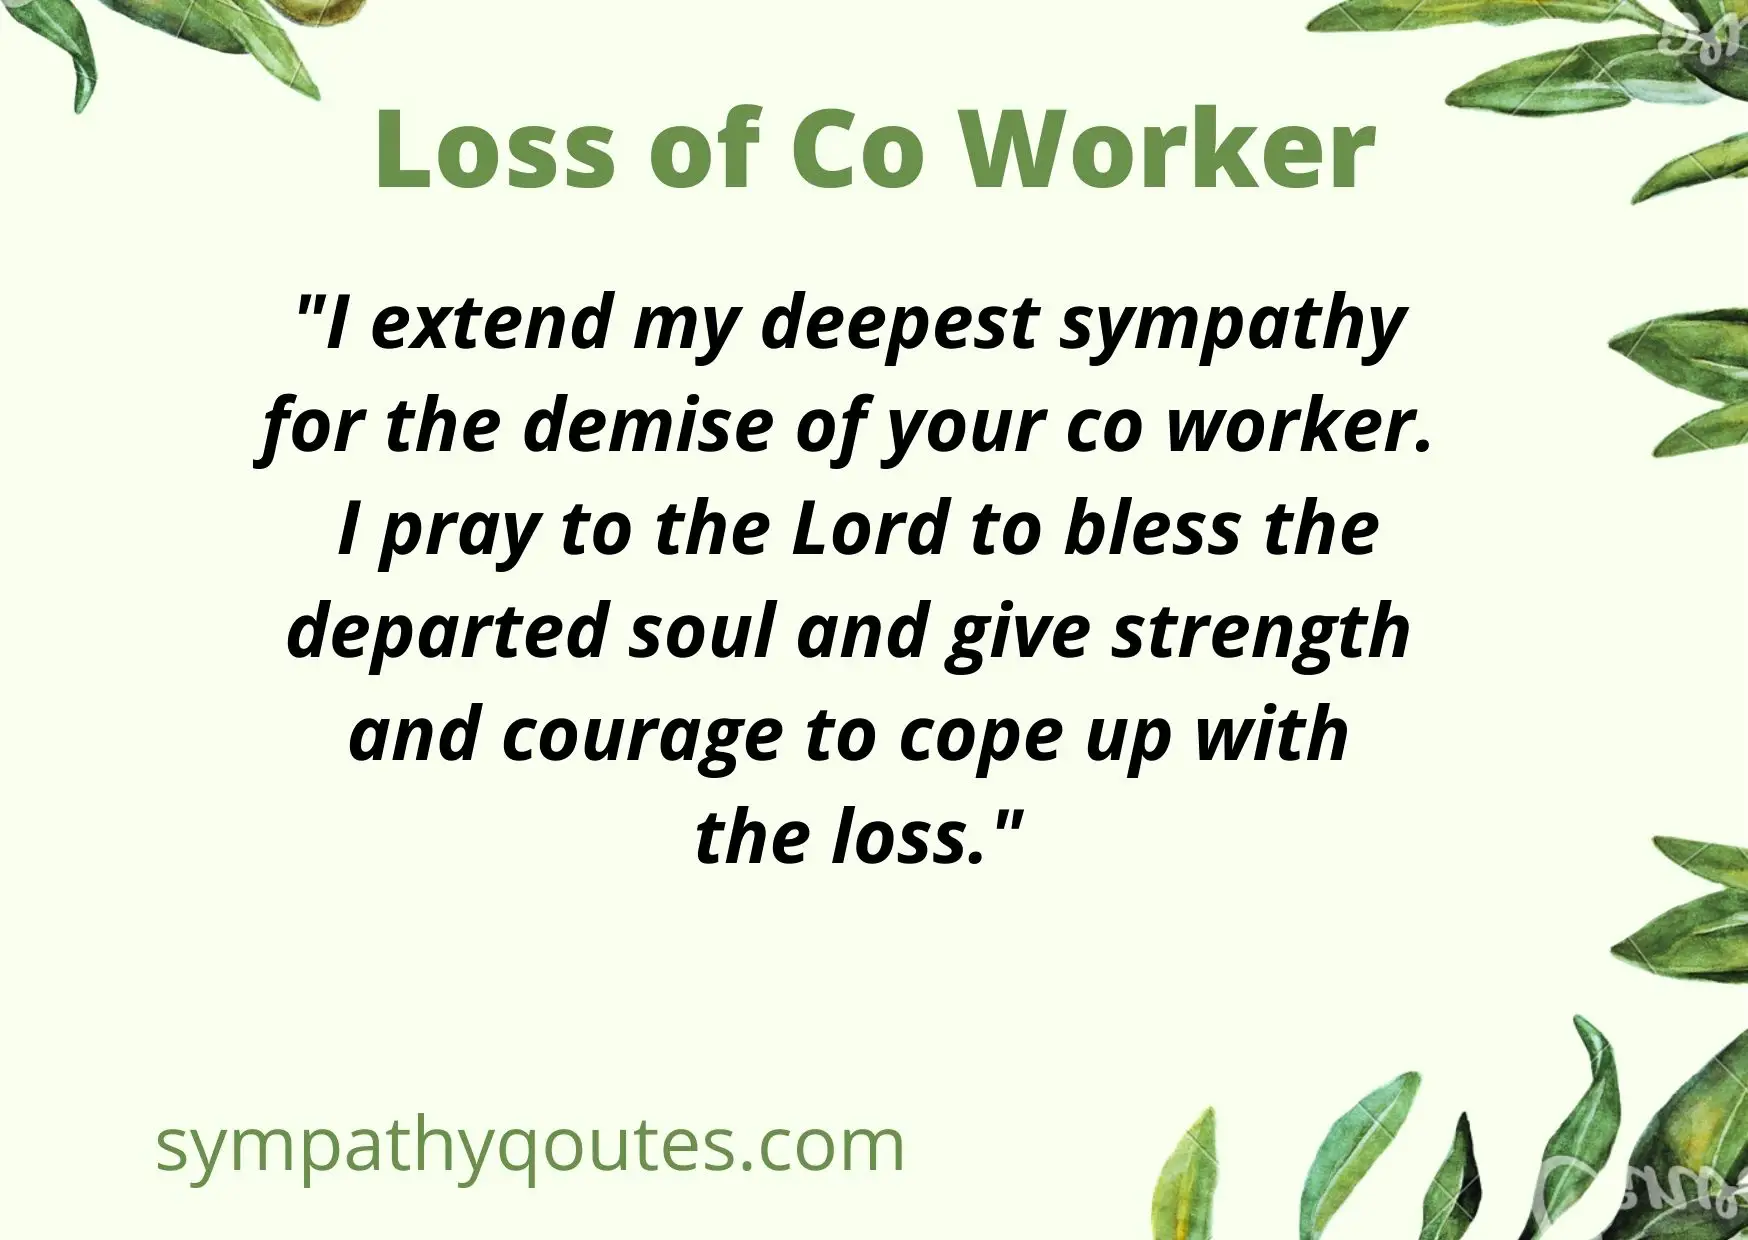 Condolence Messages for Loss of Co Worker